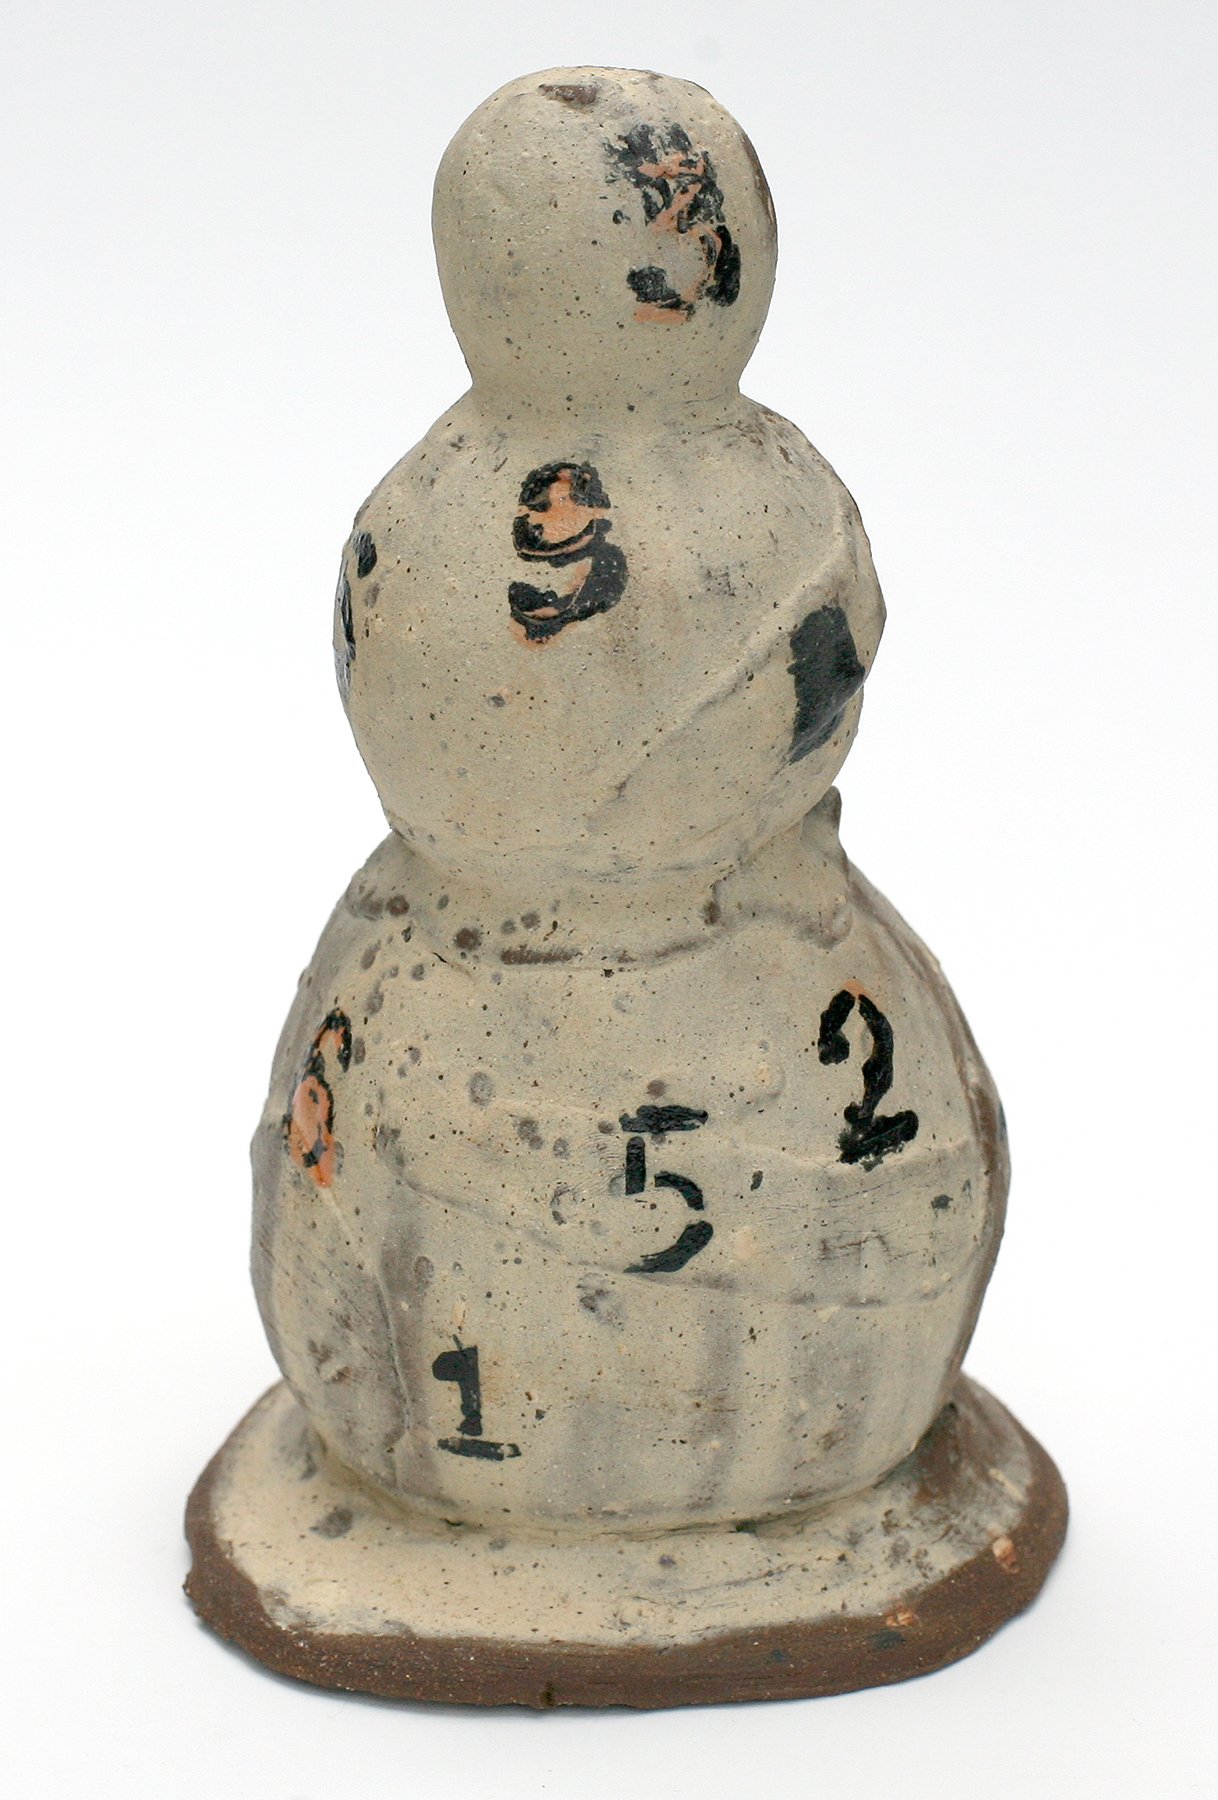 Numbered Snowman 02 (private collection)